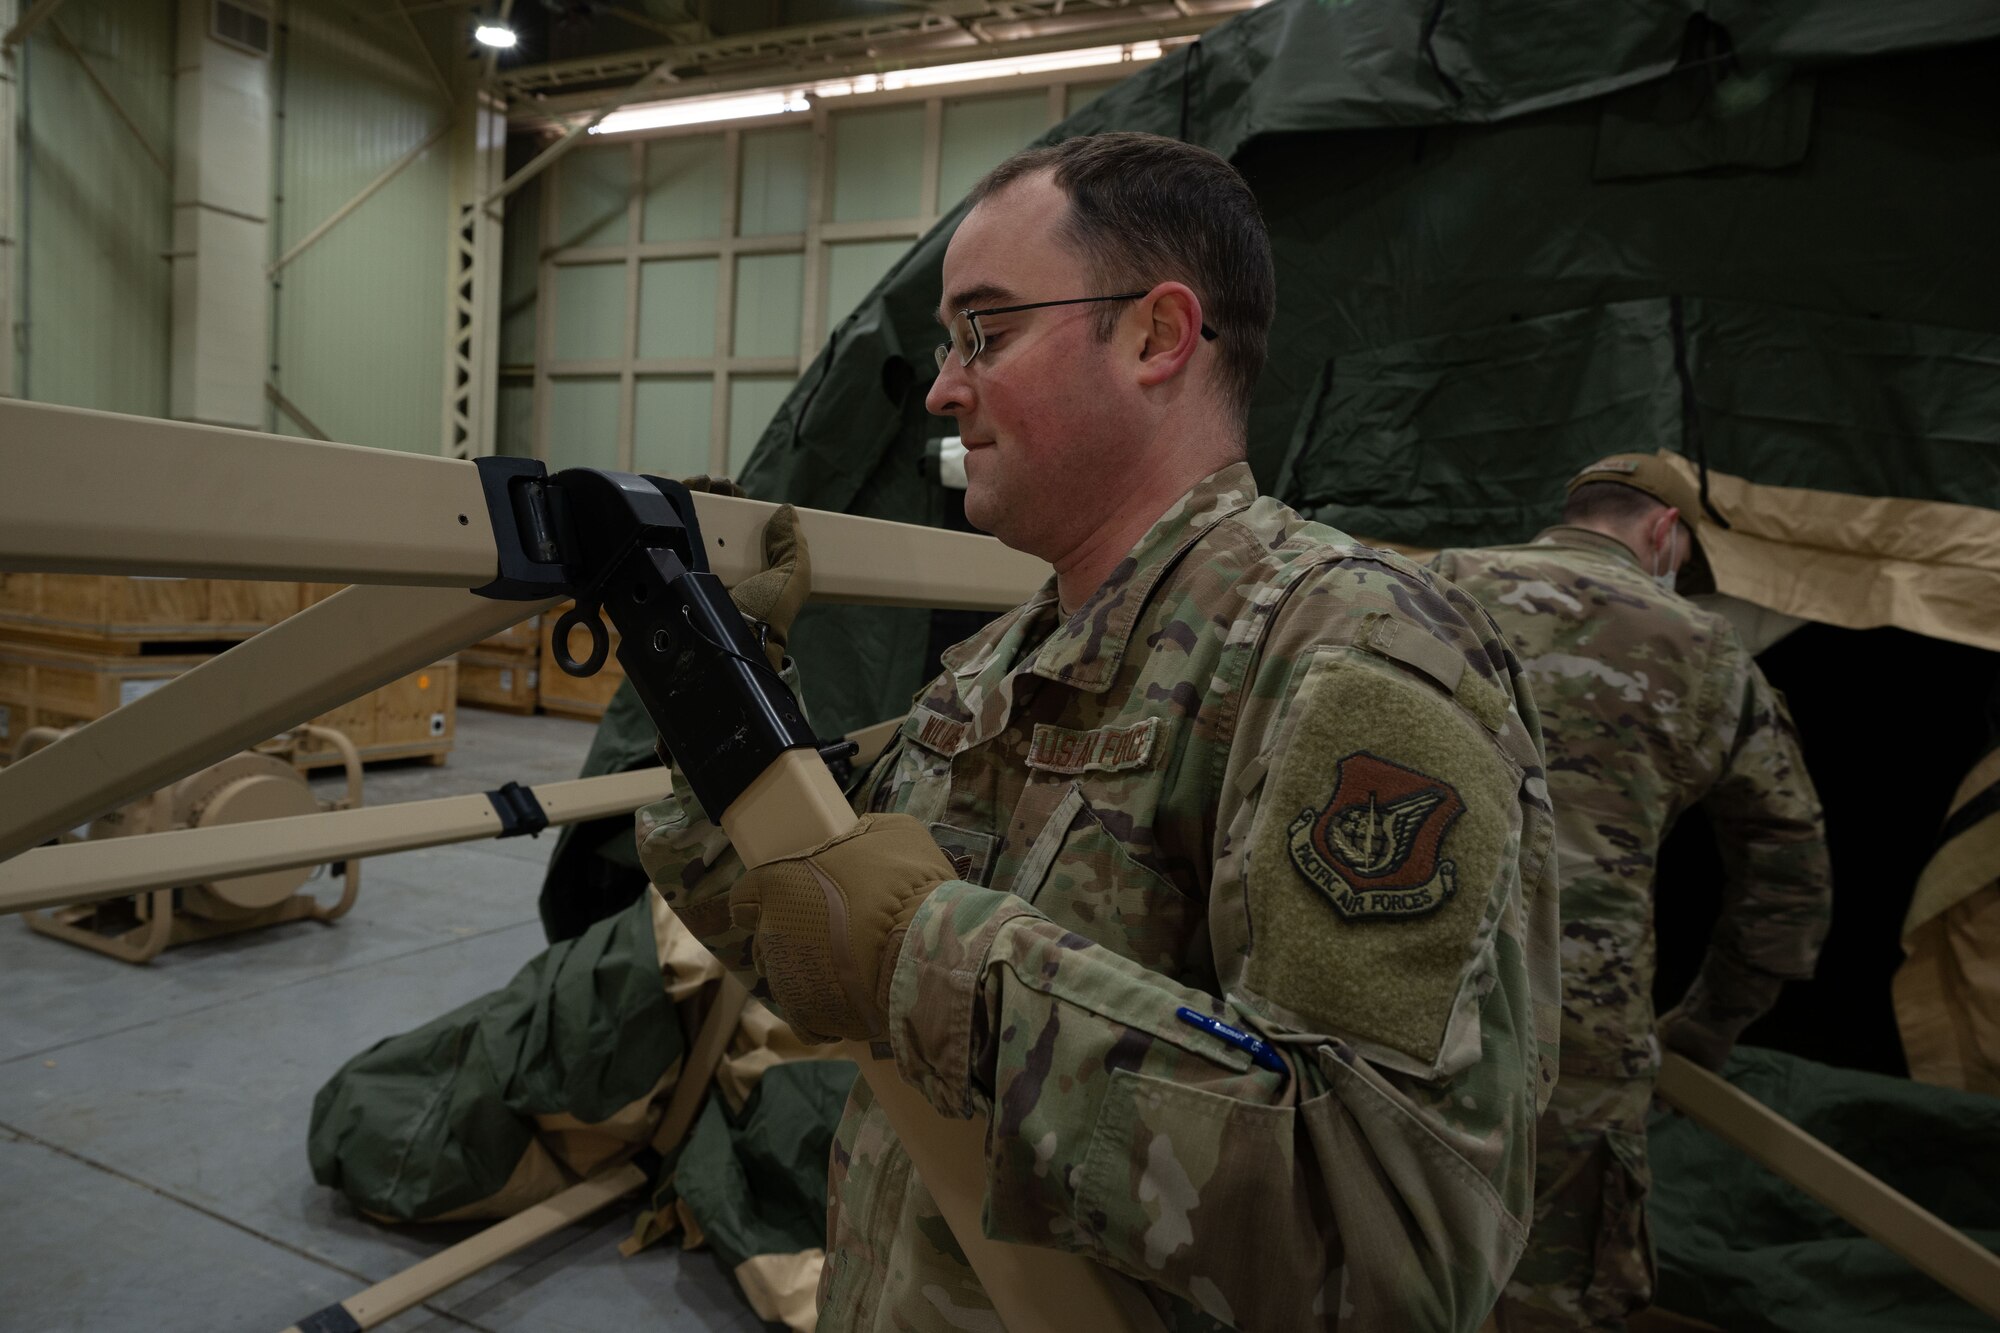 Tech. Sgt. Jordan Williams, 354th Medical Group NCO in charge of medical materiel from Eielson Air Force Base, Alaska, assembles the frame of the multi-functional entrance at Kunsan Air Base, Republic of Korea, Jan. 20, 2023. A tent kit 2 chemical protection system can protect up to 20 personnel from chemical, biological, radiological, and nuclear contamination for up to 48 hours. (U.S. Air Force photo by Senior Airman Akeem K. Campbell)